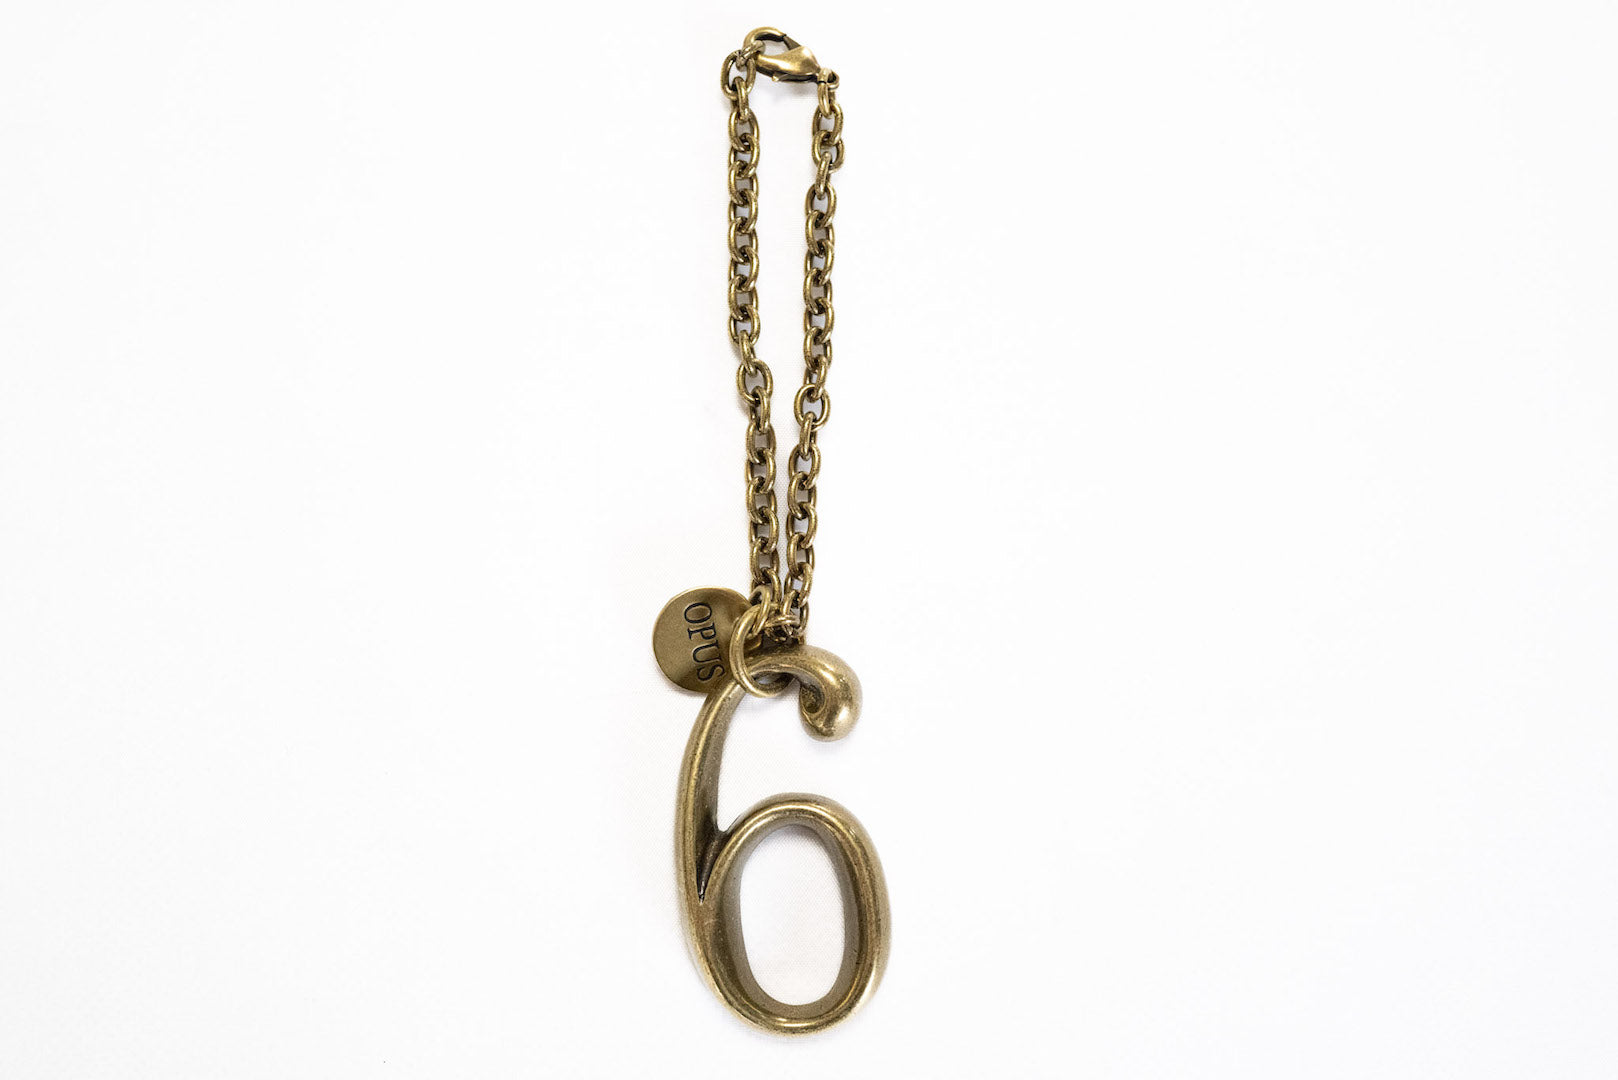 Inception by Accel Company "Numbers" Charm Chain